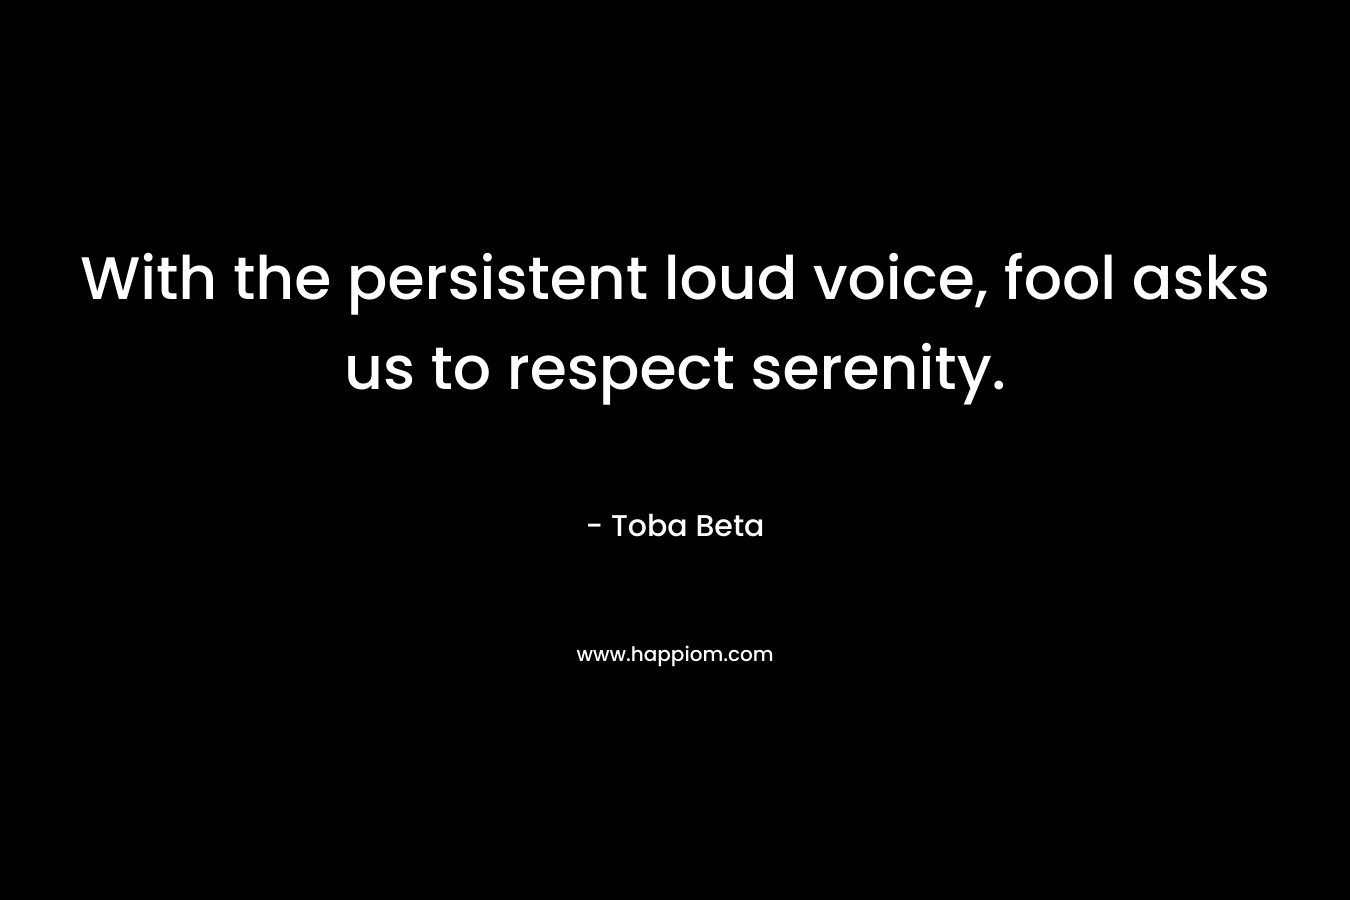 With the persistent loud voice, fool asks us to respect serenity. – Toba Beta